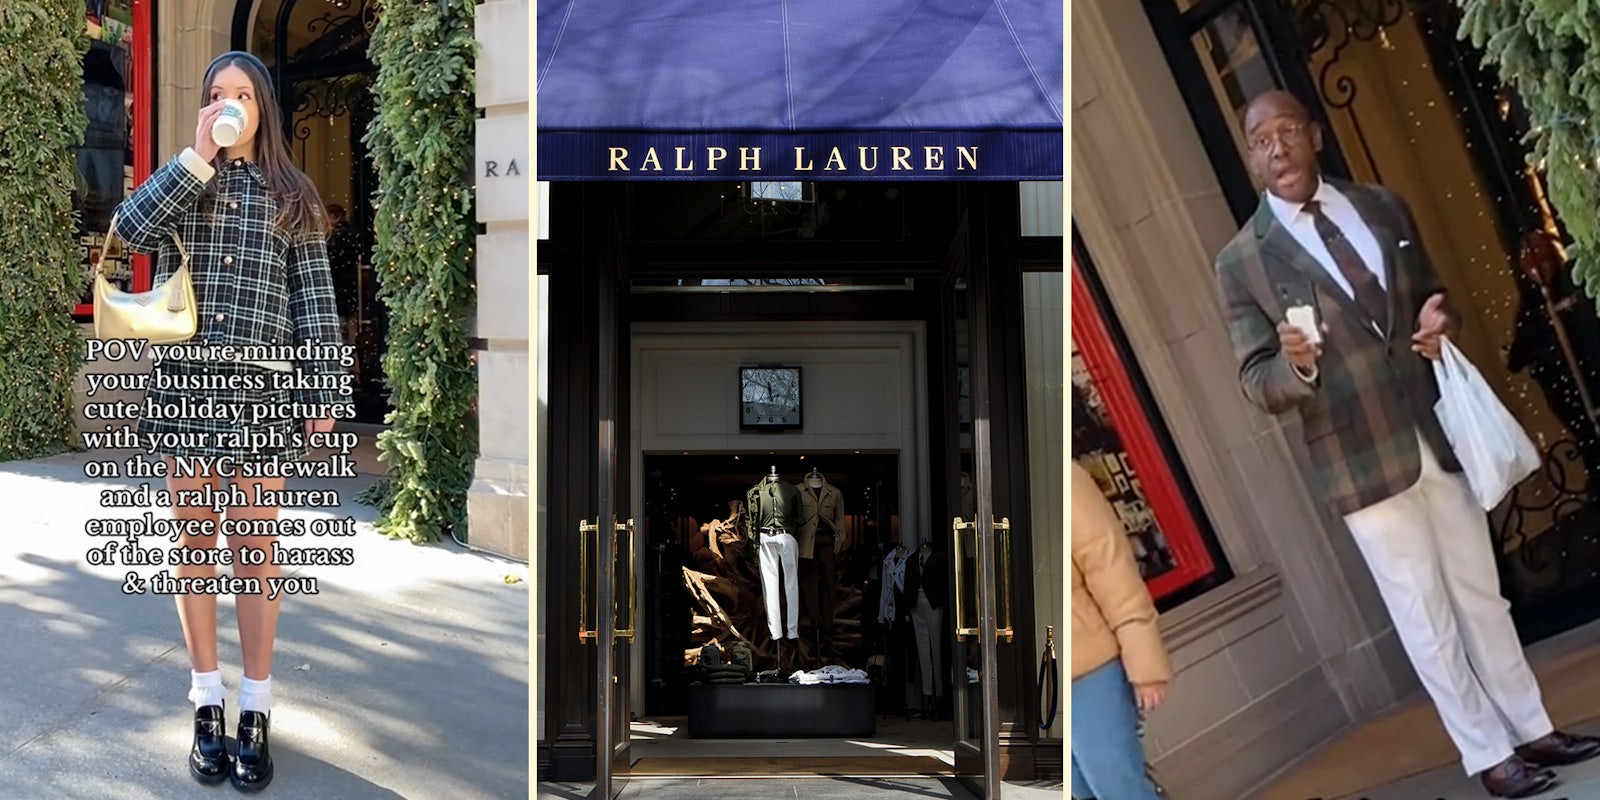 Influencer accosted by Ralph Lauren employee for taking selfies on the sidewalk